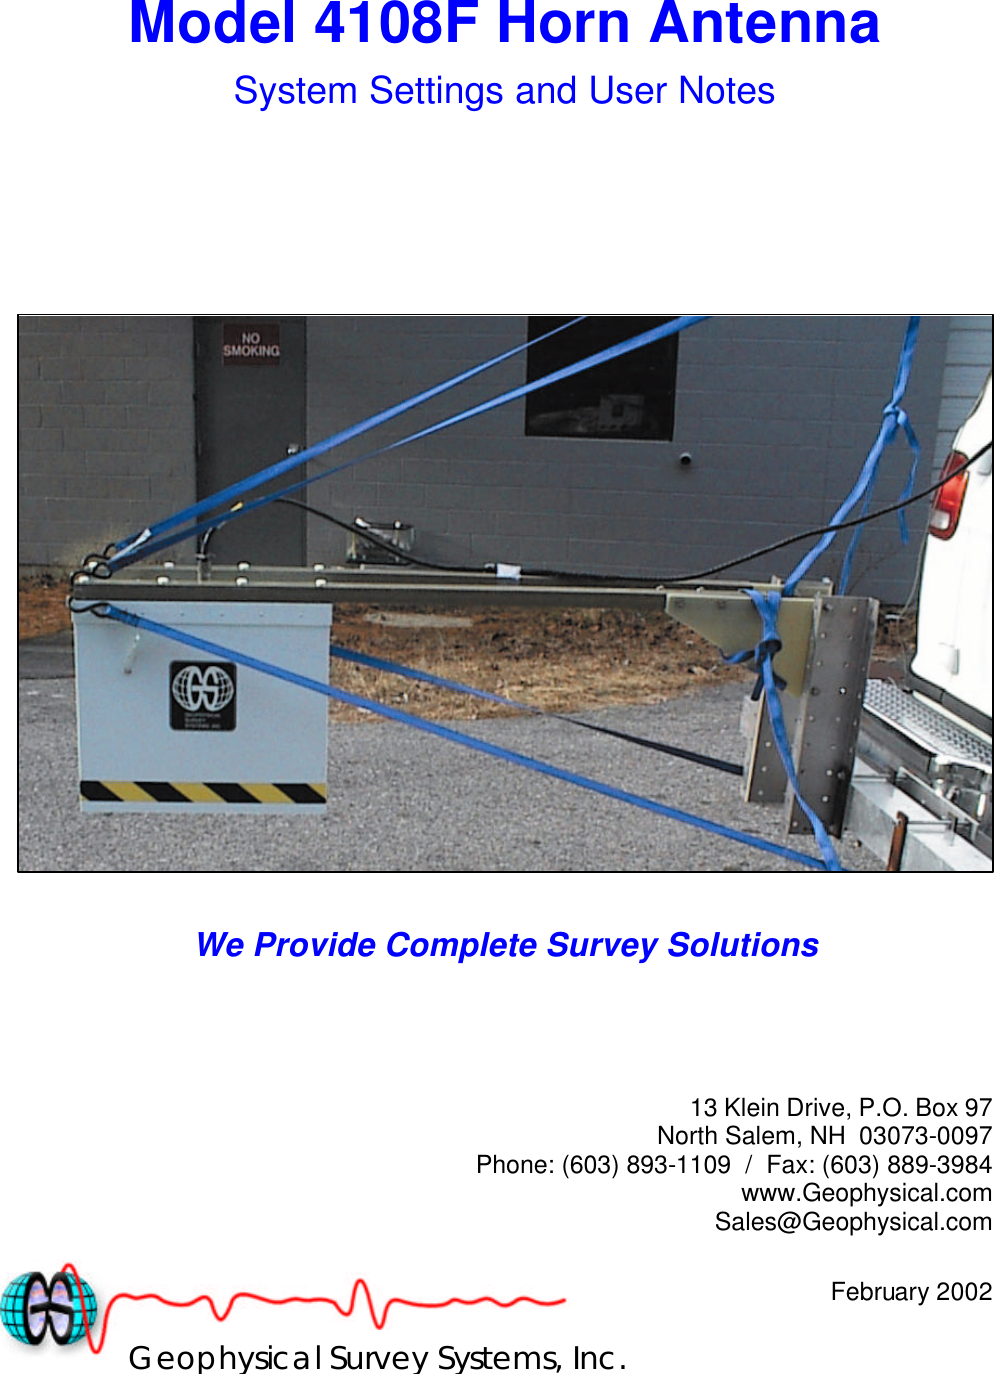  Model 4108F Horn Antenna System Settings and User Notes       We Provide Complete Survey Solutions     13 Klein Drive, P.O. Box 97 North Salem, NH  03073-0097 Phone: (603) 893-1109  /  Fax: (603) 889-3984 www.Geophysical.com Sales@Geophysical.com  February 2002Geophysical Survey Systems, Inc. 